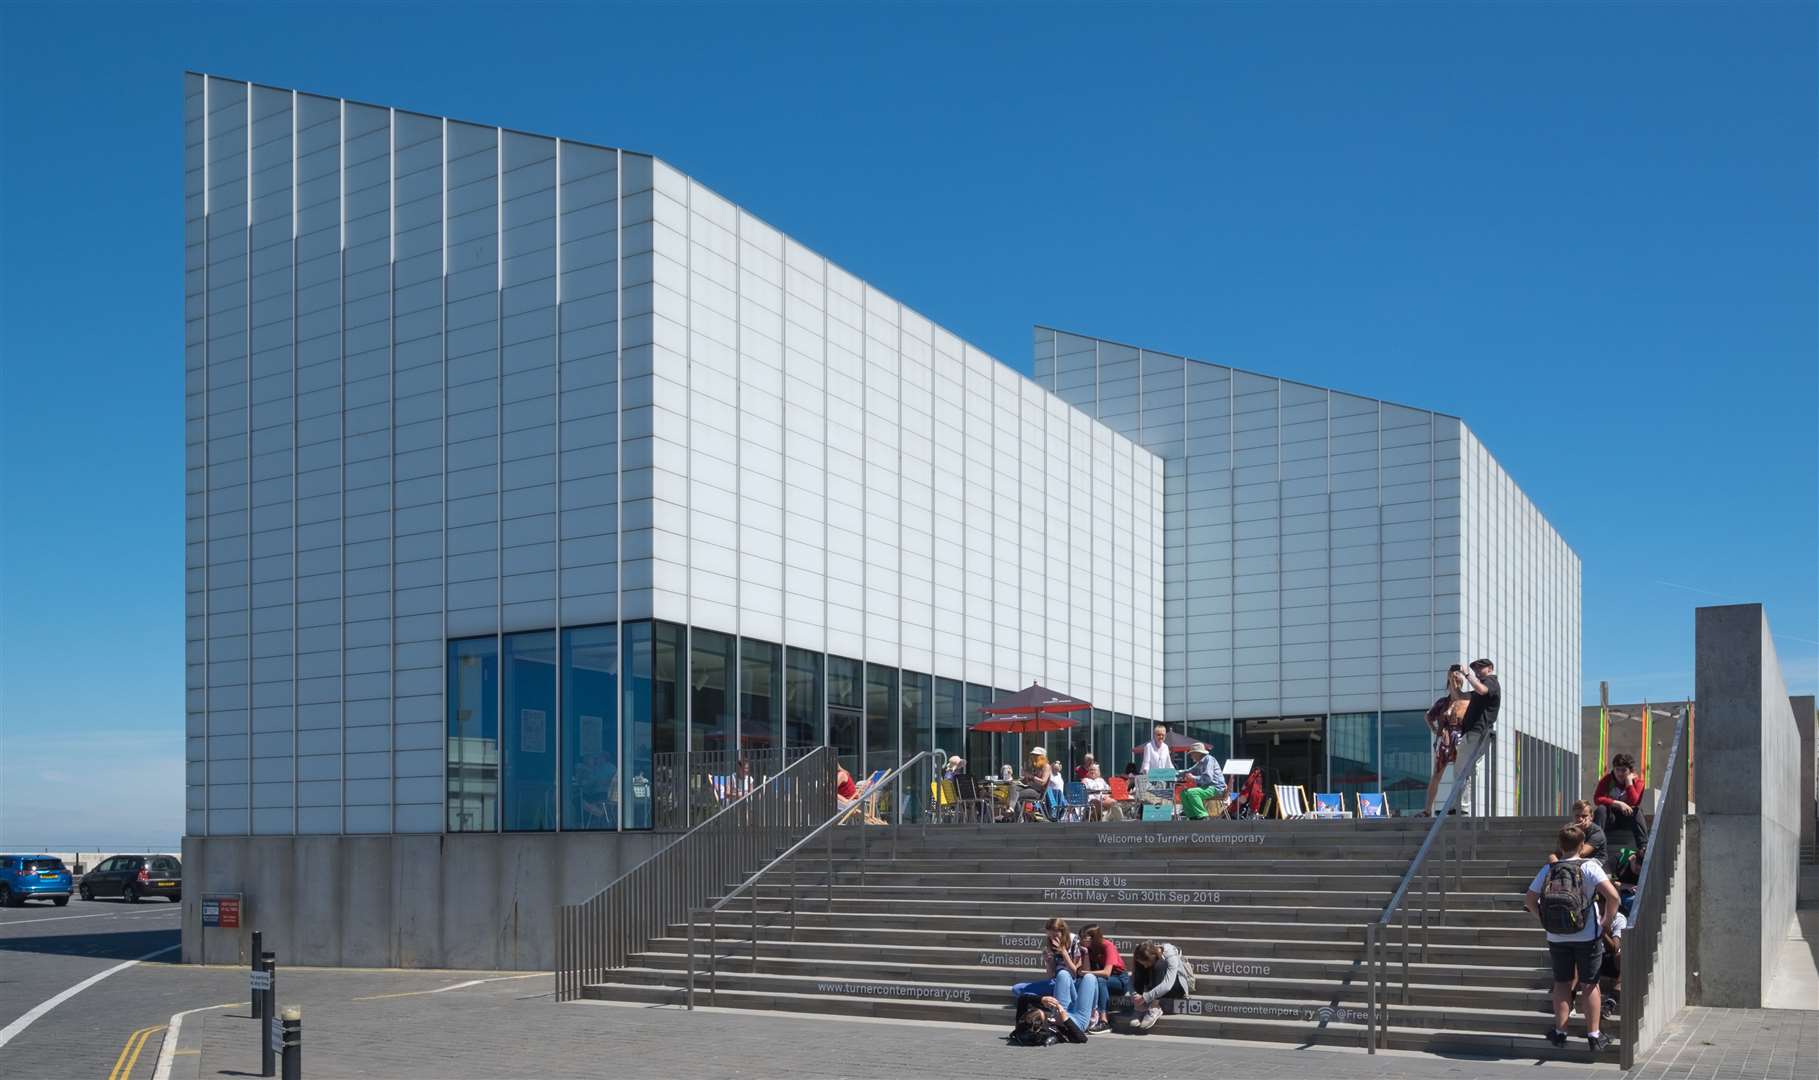 Turner Contemporary in Margate will host the Turner Prize shortlist